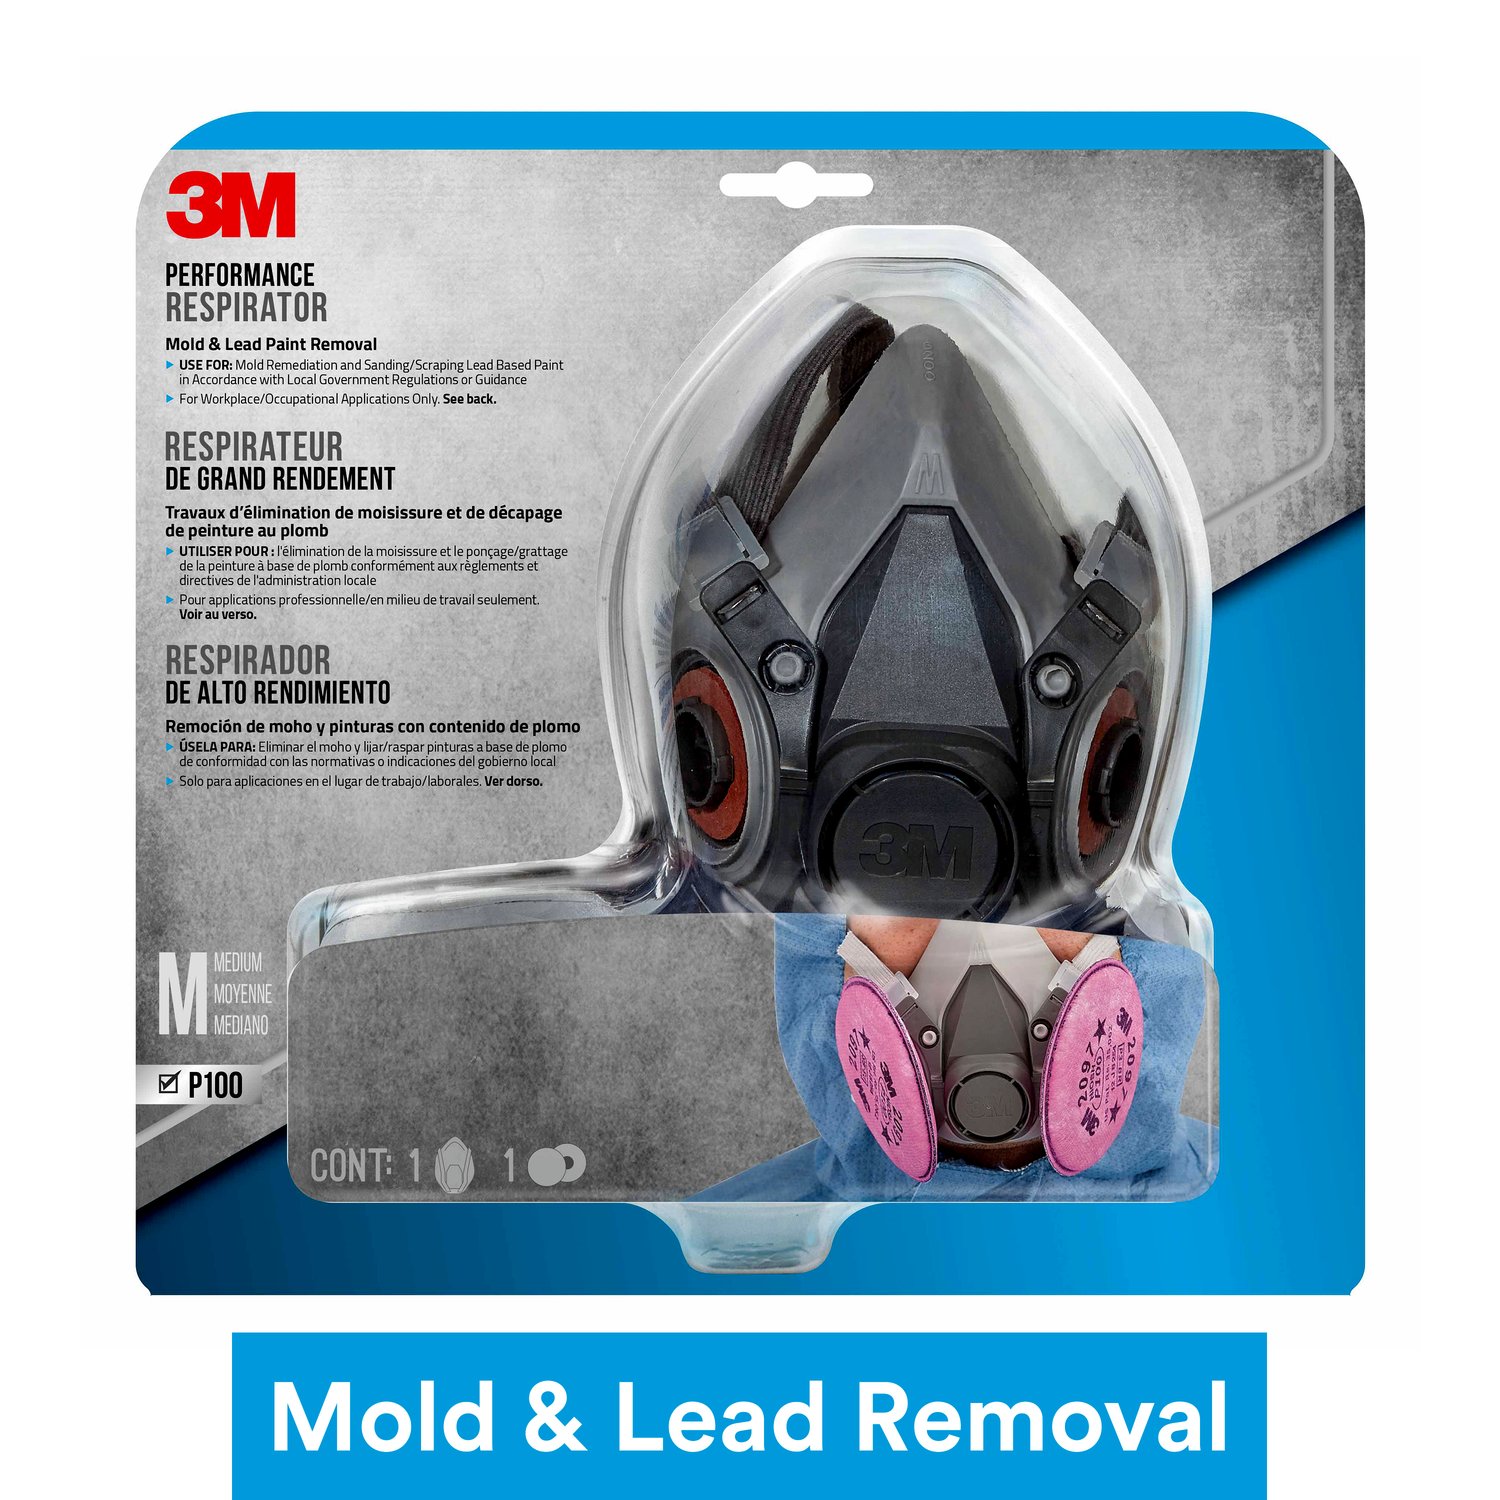 7100159328 - 3M Performance Mold and Lead Paint Removal Respirator P100, 6297P1-DC, Size Medium, 1 each/pack, 4 packs/case